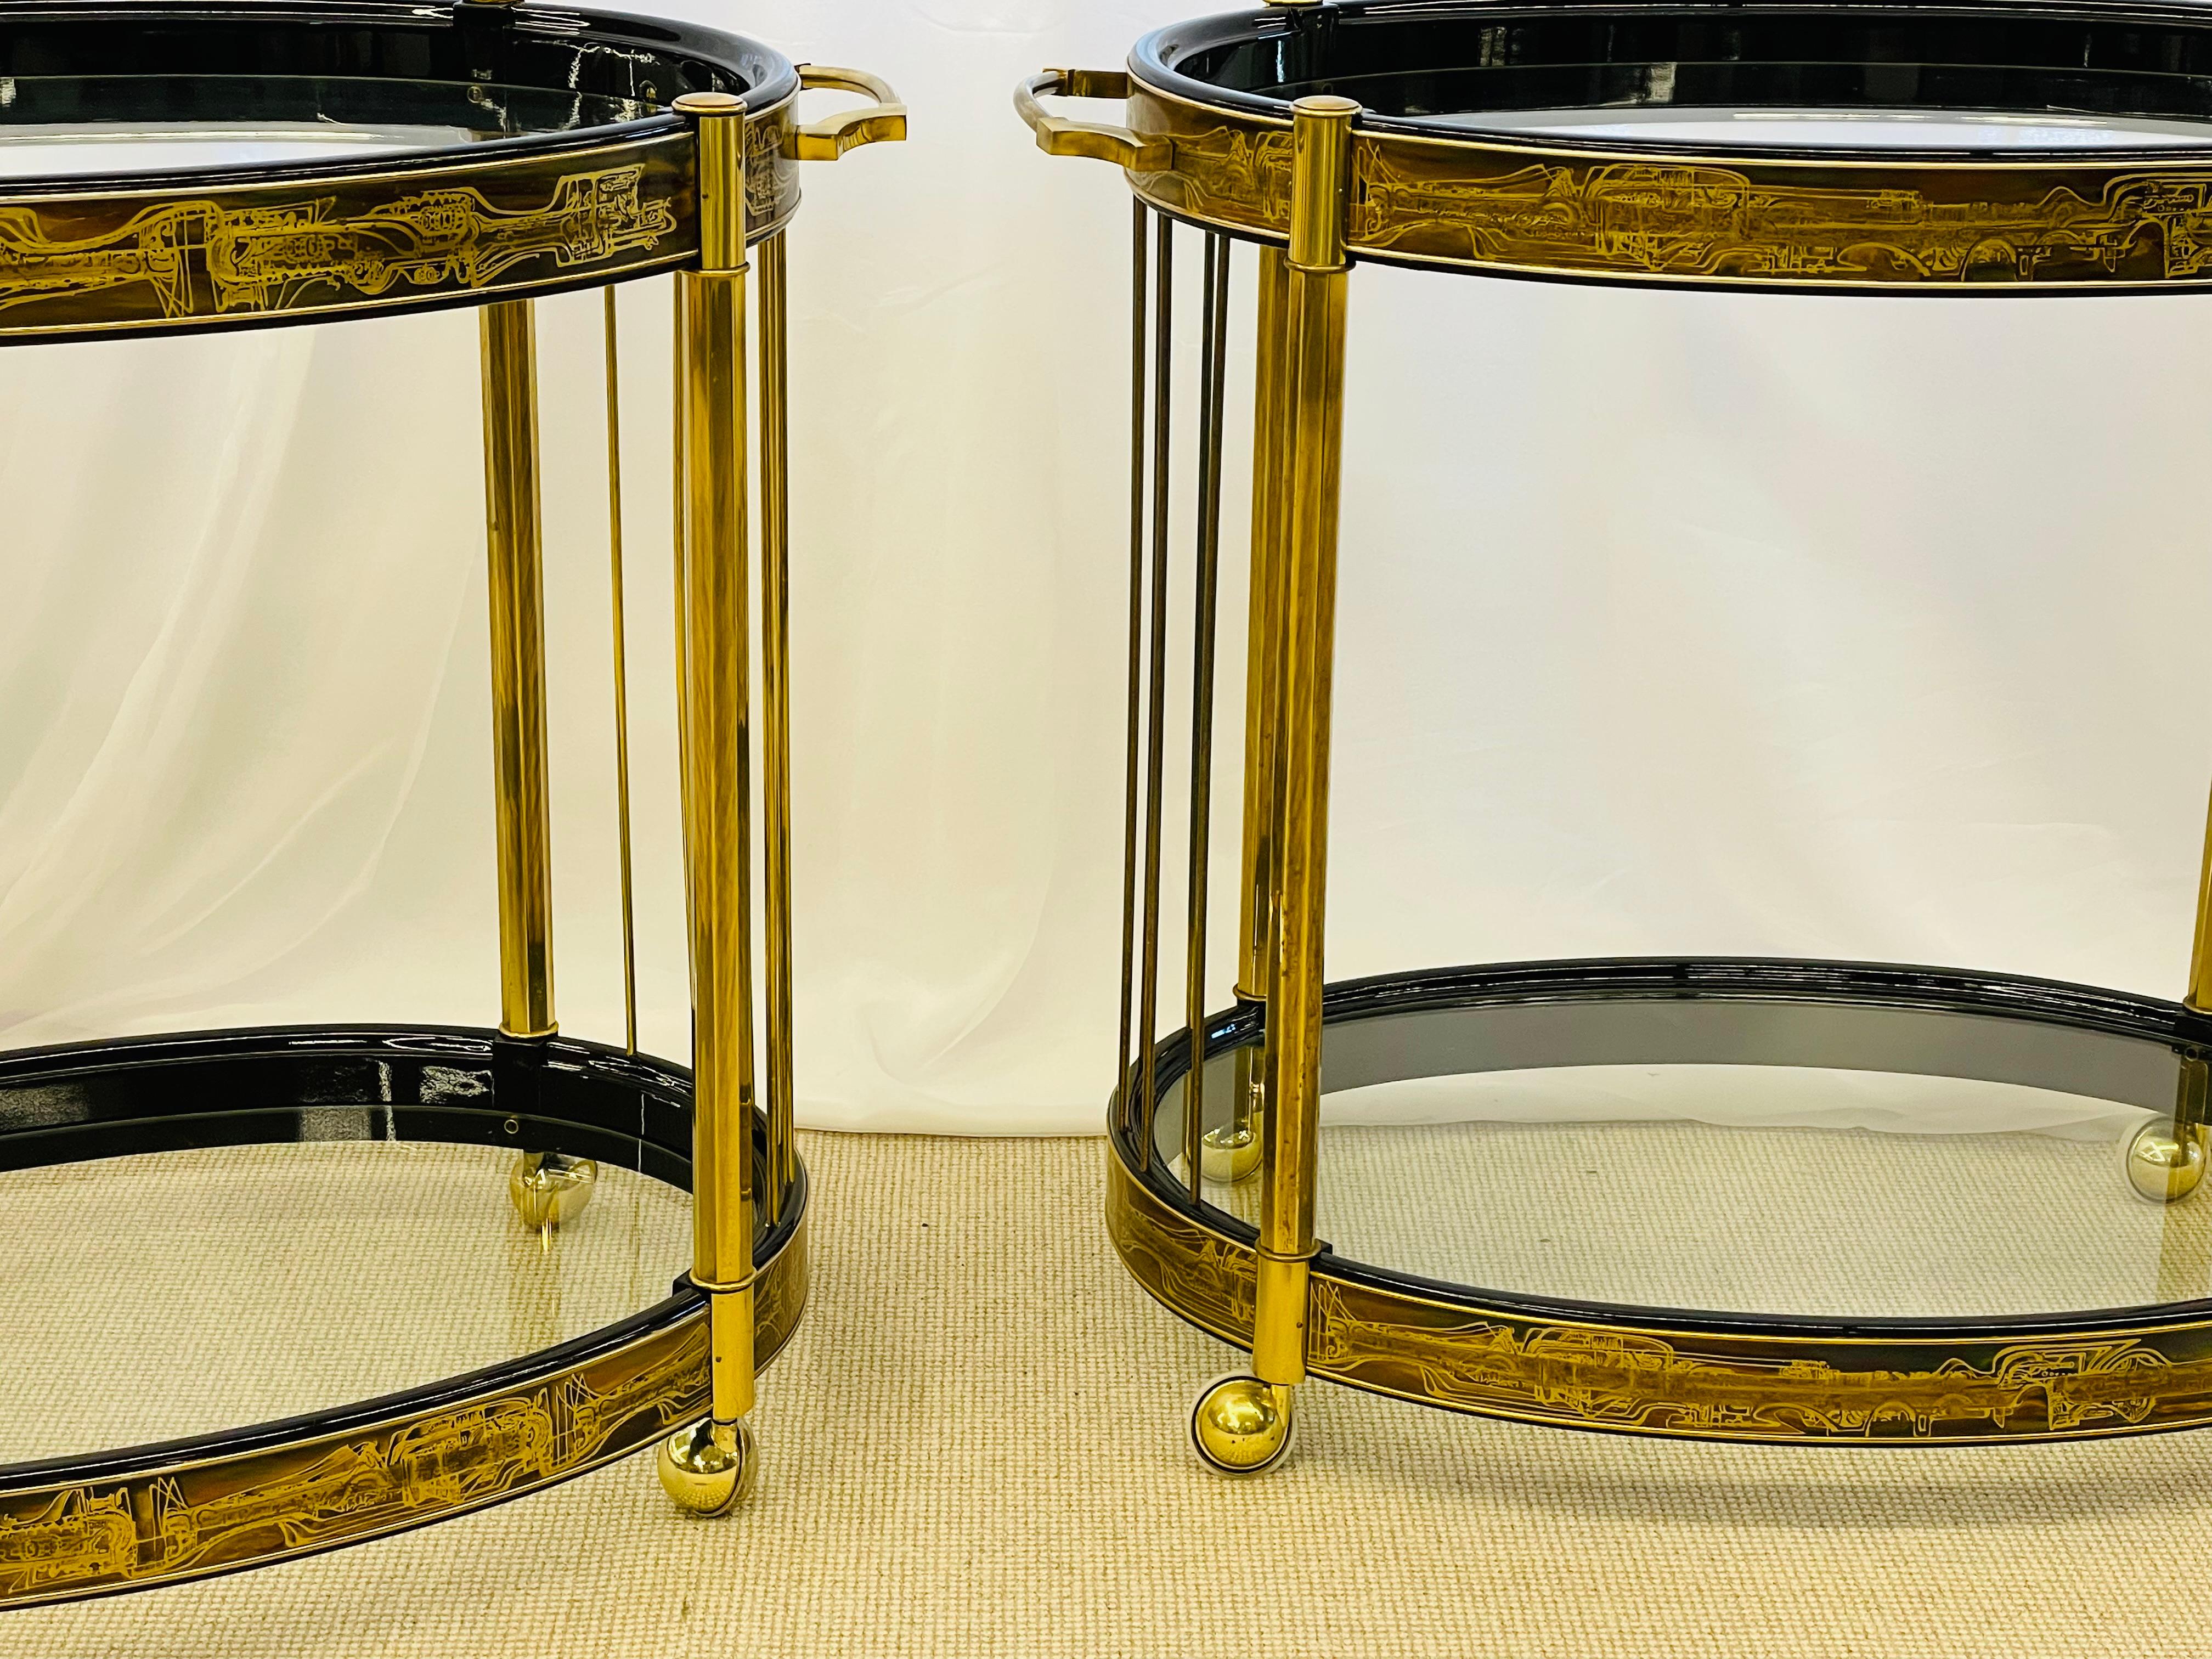 Mastercraft, Mid-Century Modern Serving Wagons, Gold Brass, Black Lacquer, 1960s For Sale 7